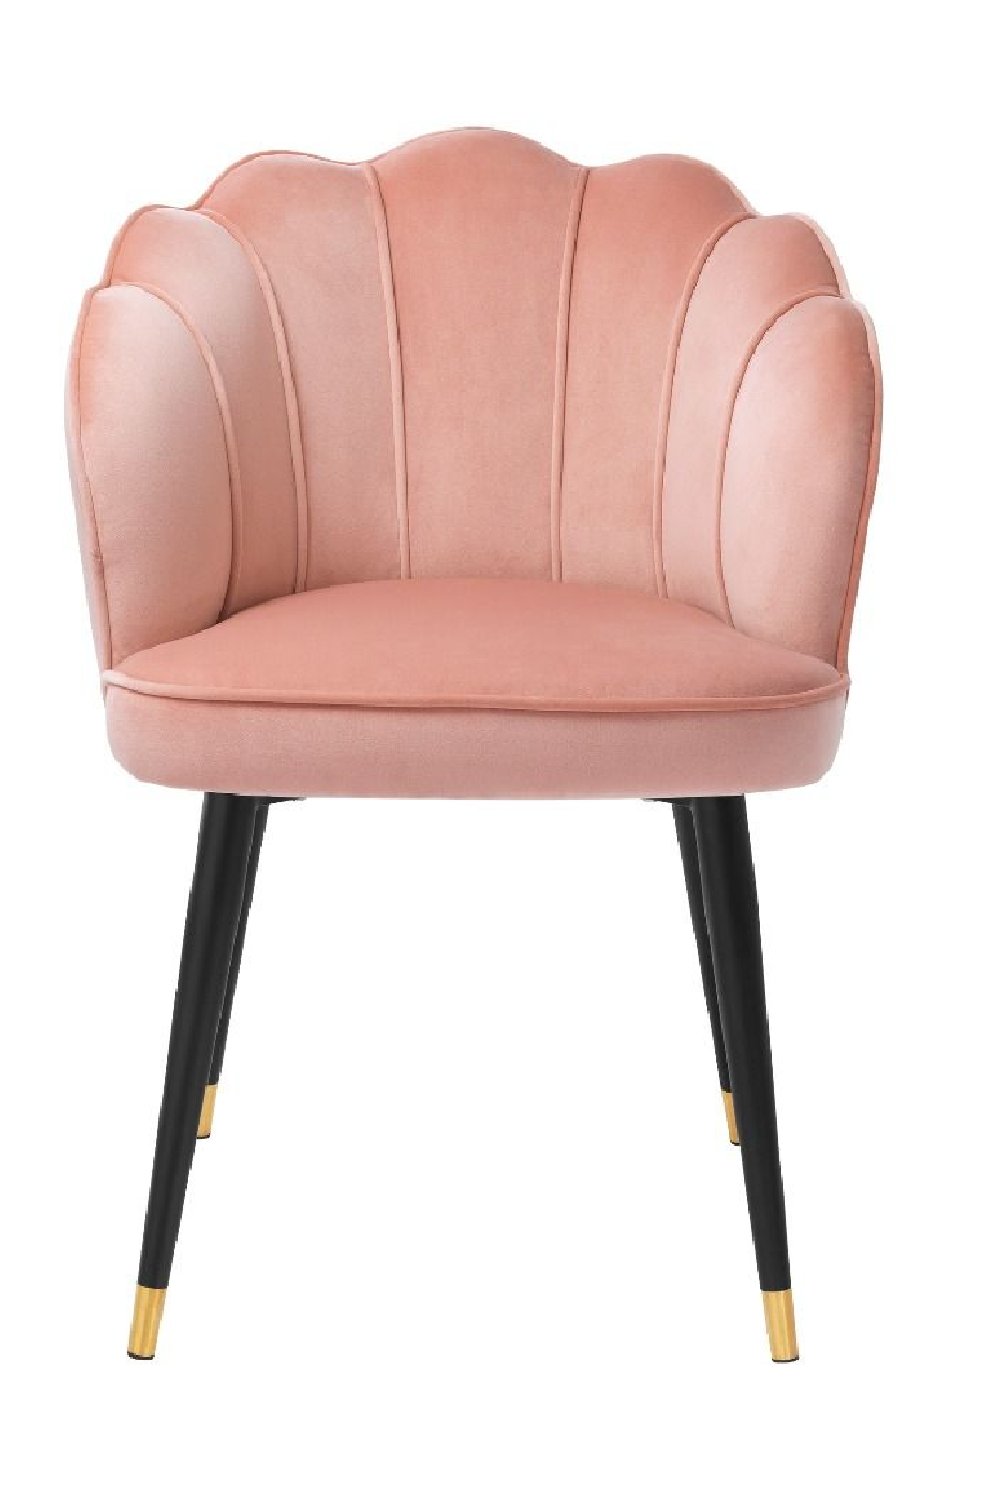 Blush Scalloped Dining Chair